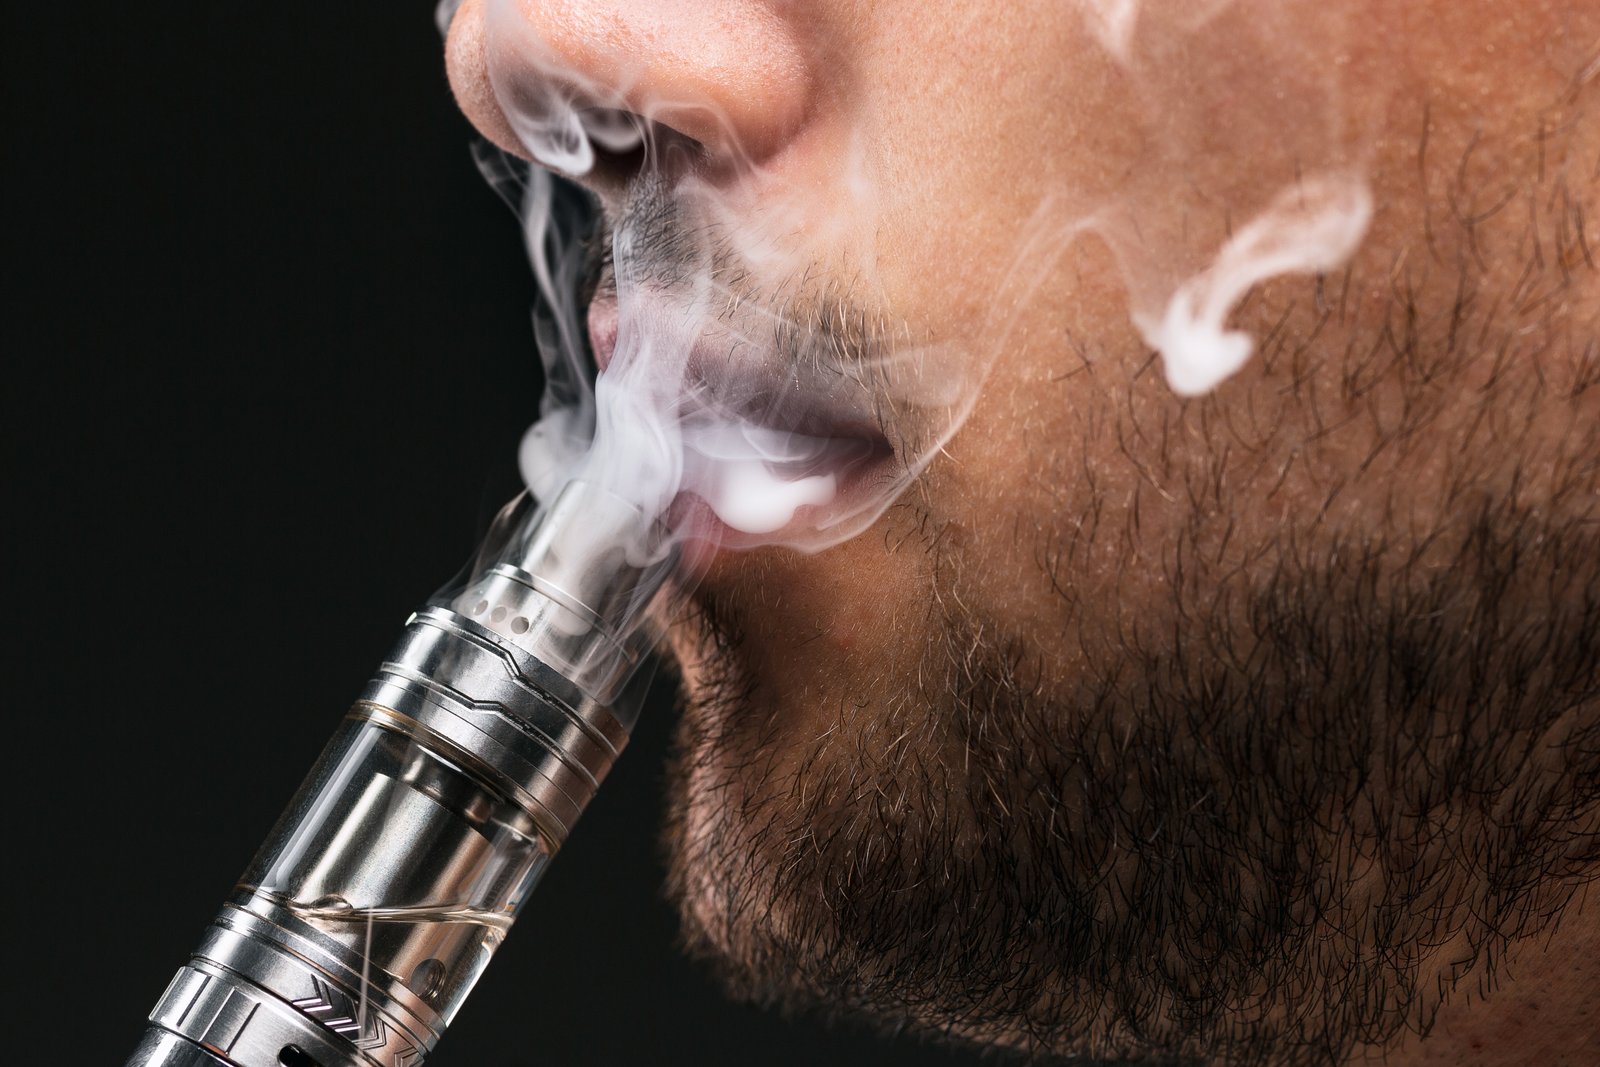 Cannabis Vaping Liquids May Have Toxic Metal Particles Even Before First Use: Study